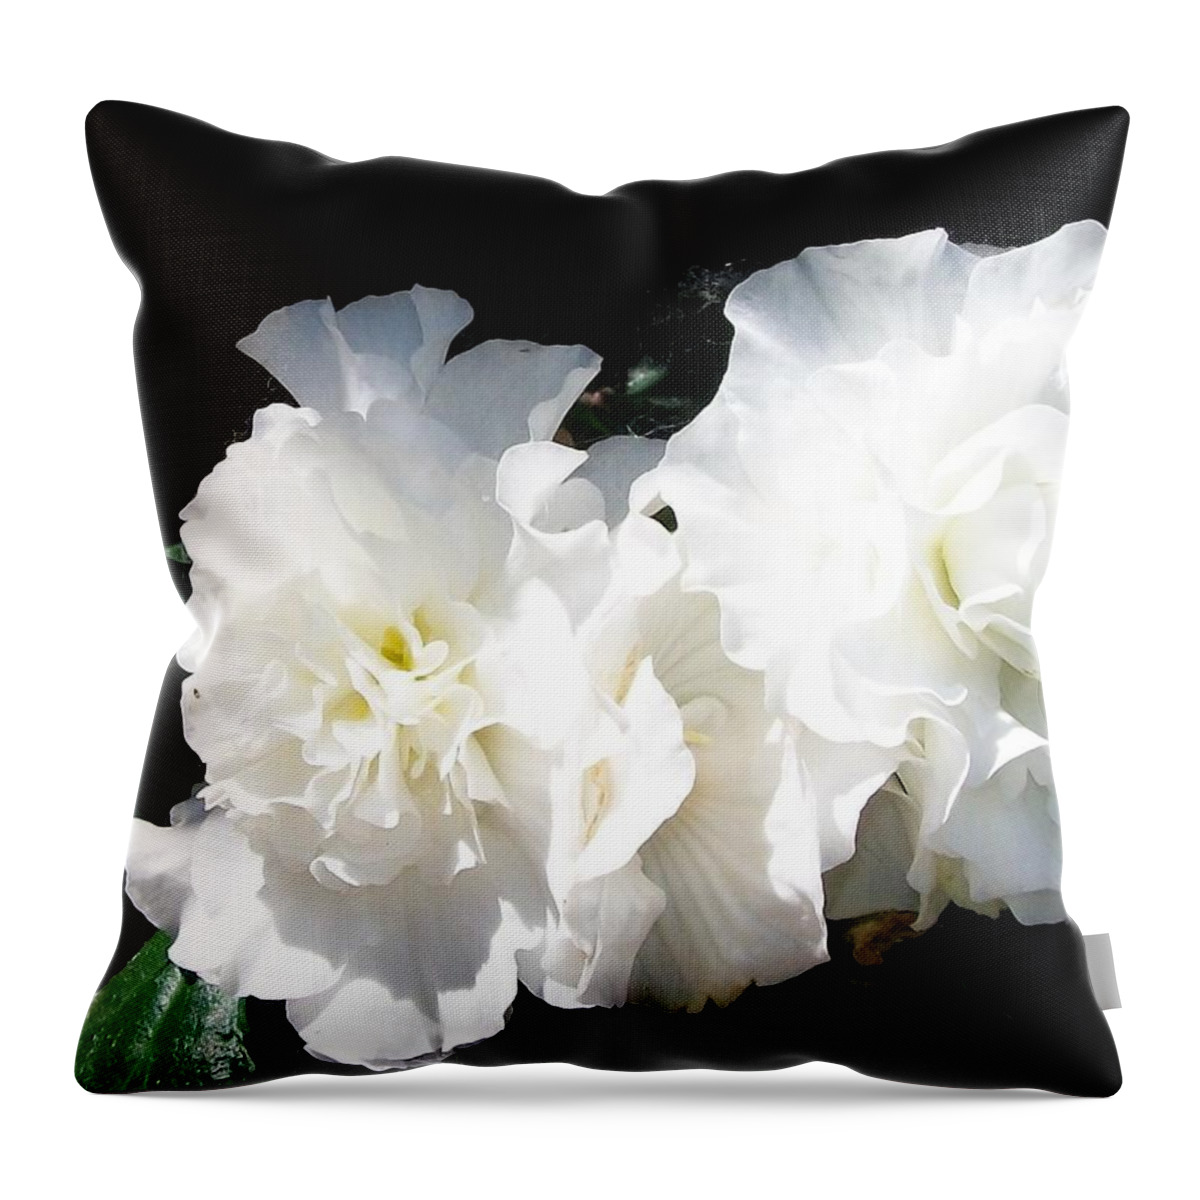 Trailing Throw Pillow featuring the photograph White Begonia by Sharon Duguay